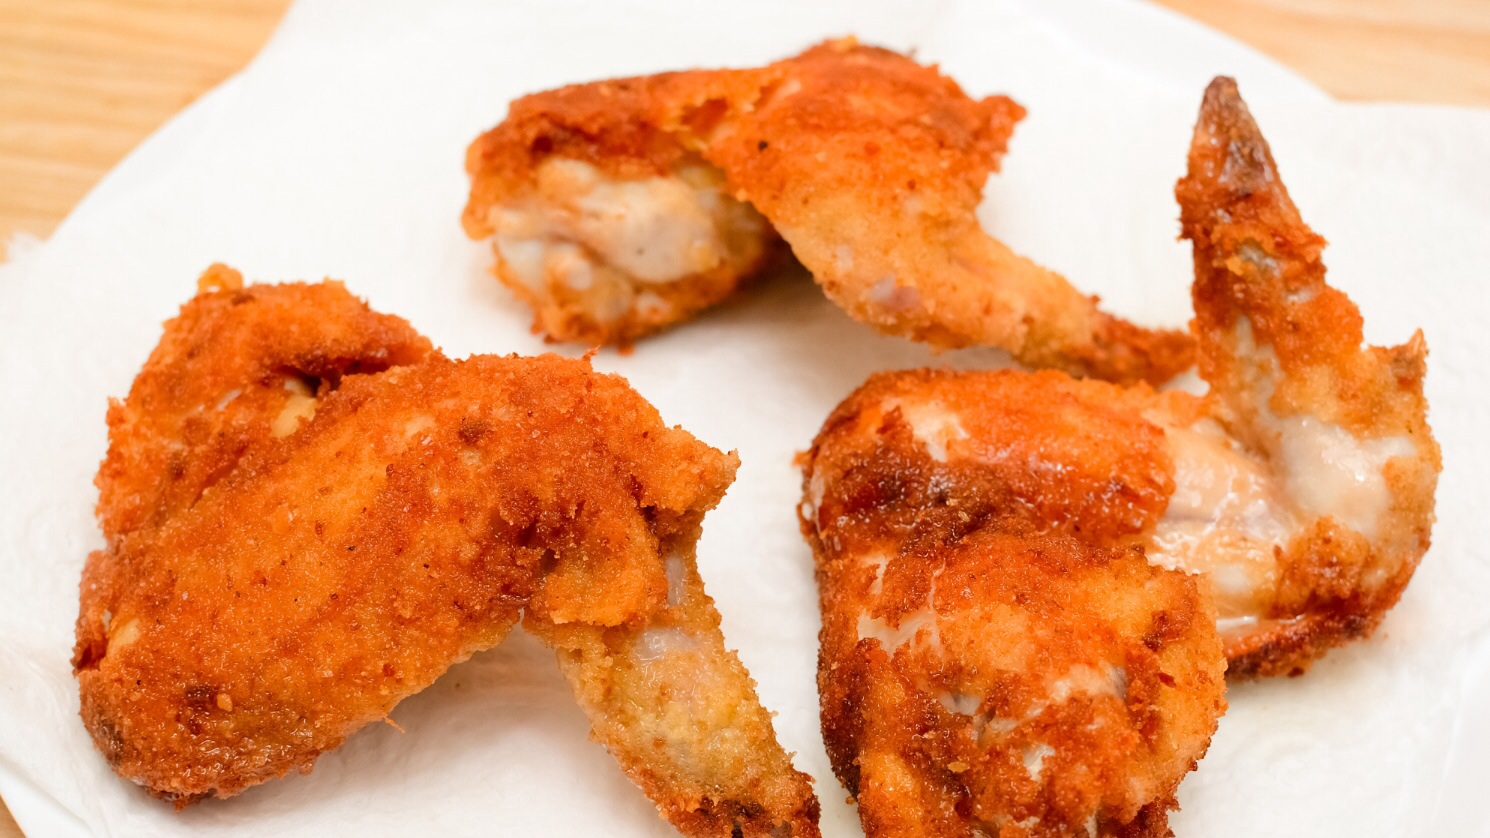 Adventist Pastor dismissed after posting Sabbath chicken wings pic